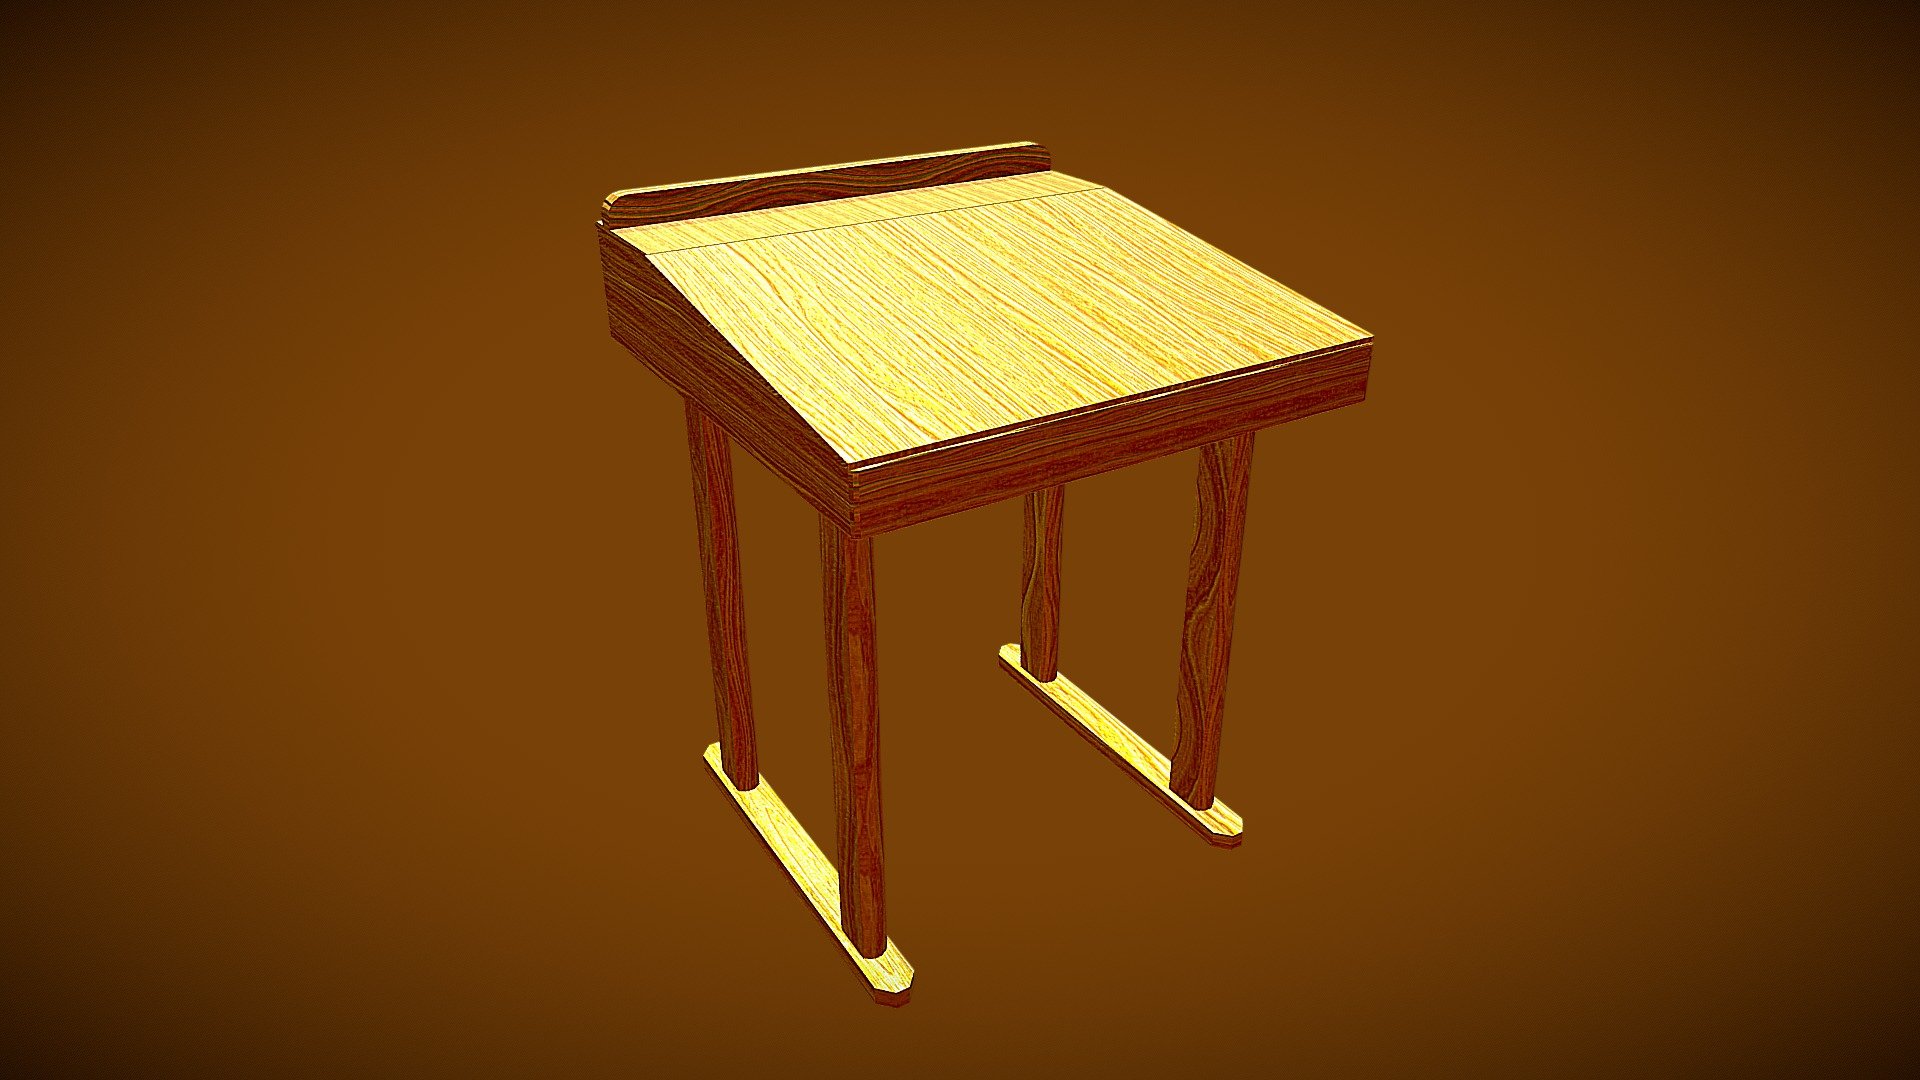 A Wooden School Desk made using Blender 2.79 and the Cycles render engine.

Check out my blog at: https://rhcreations.tumblr.com/ - School Desk - Download Free 3D model by rhcreations 3d model